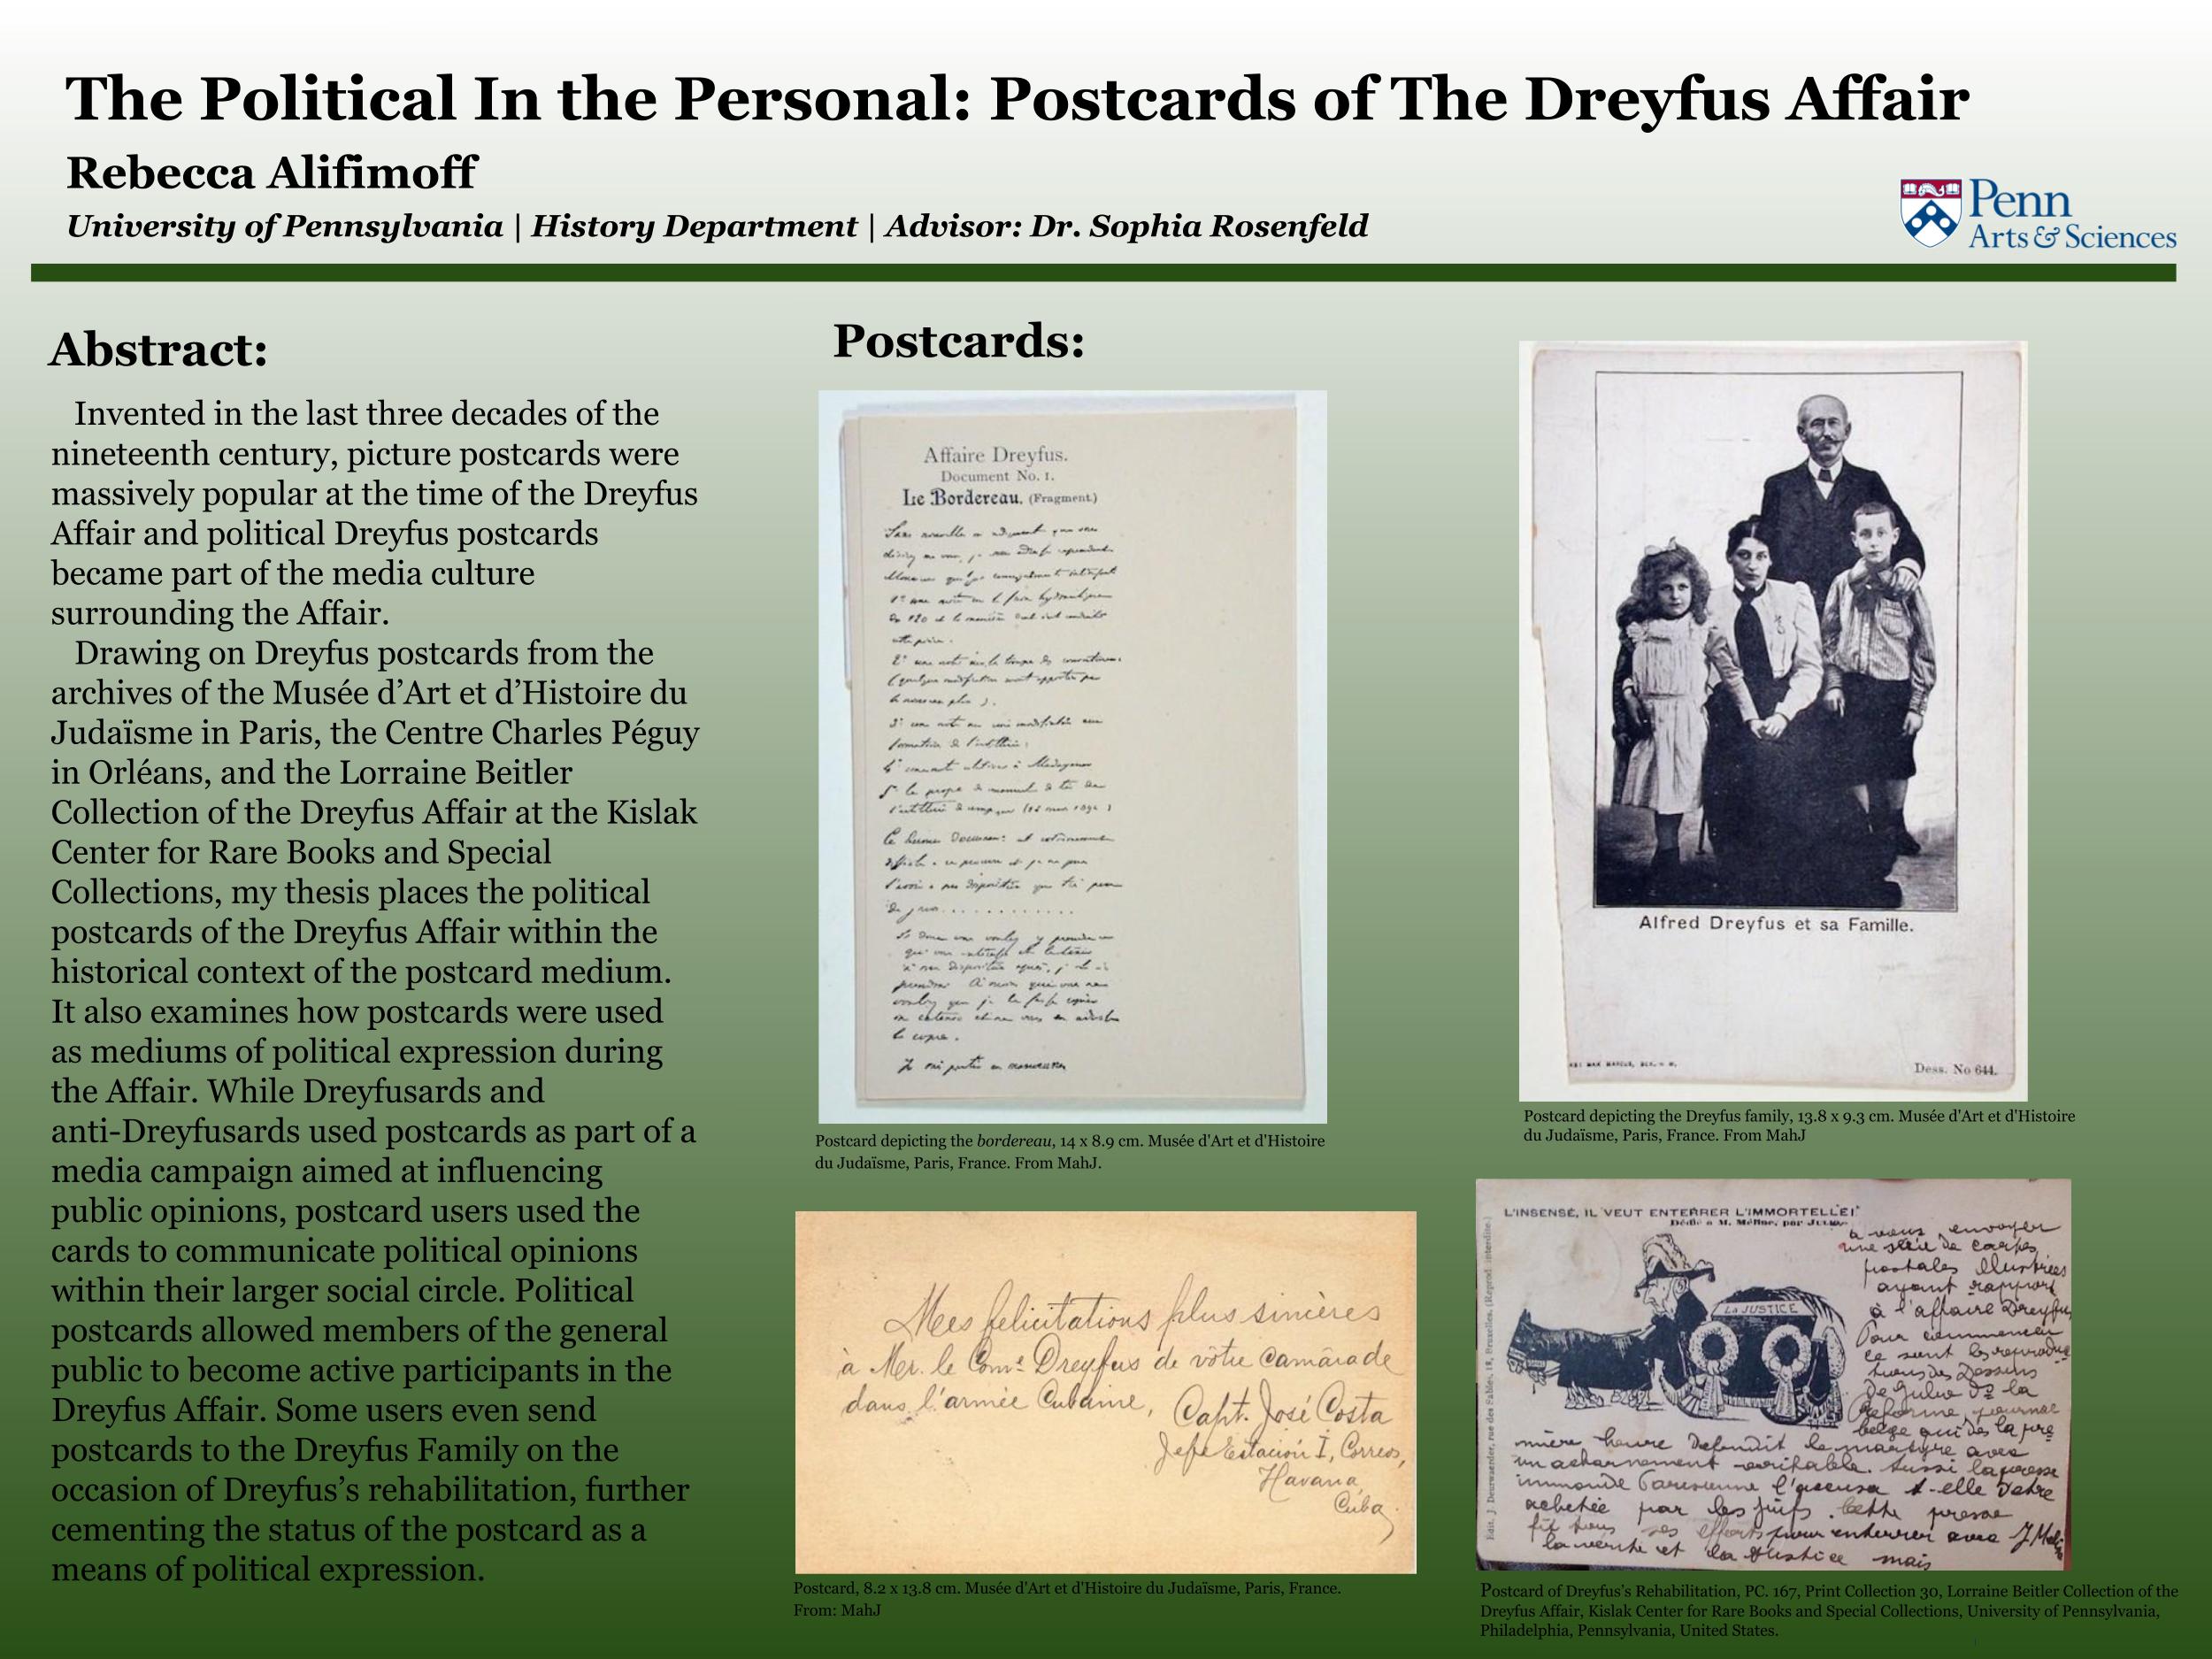 Politics in the Personal: Usage of Picture Postcards during the Dreyfus Affair